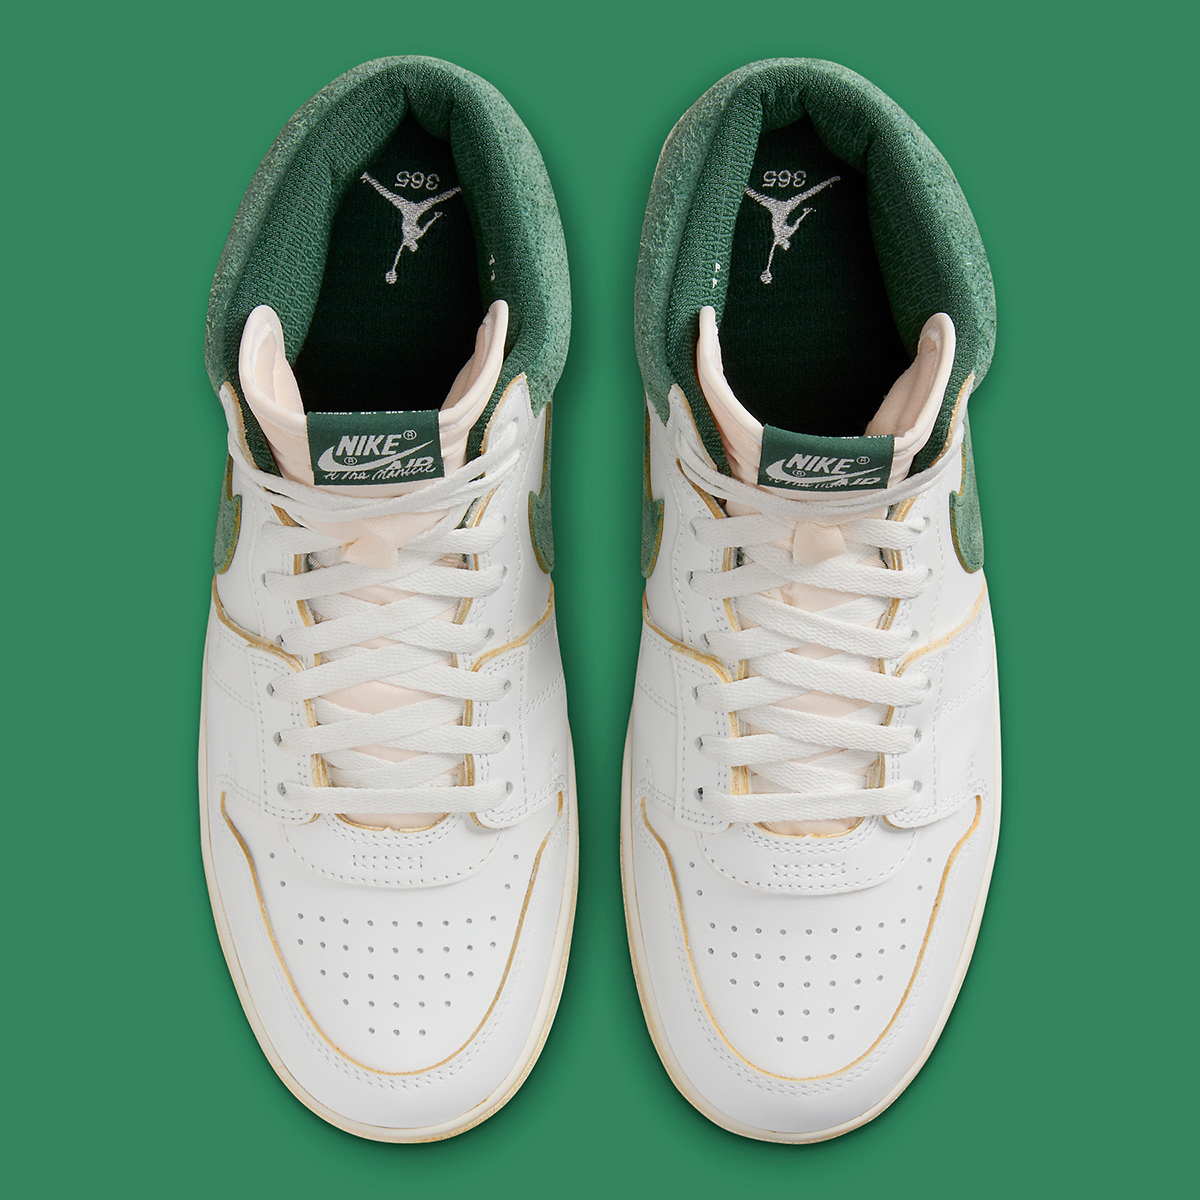 A Ma Maniere In addition to the Air Jordan 7 that dropped back in 2015 Green Stone Fq2942 100 8